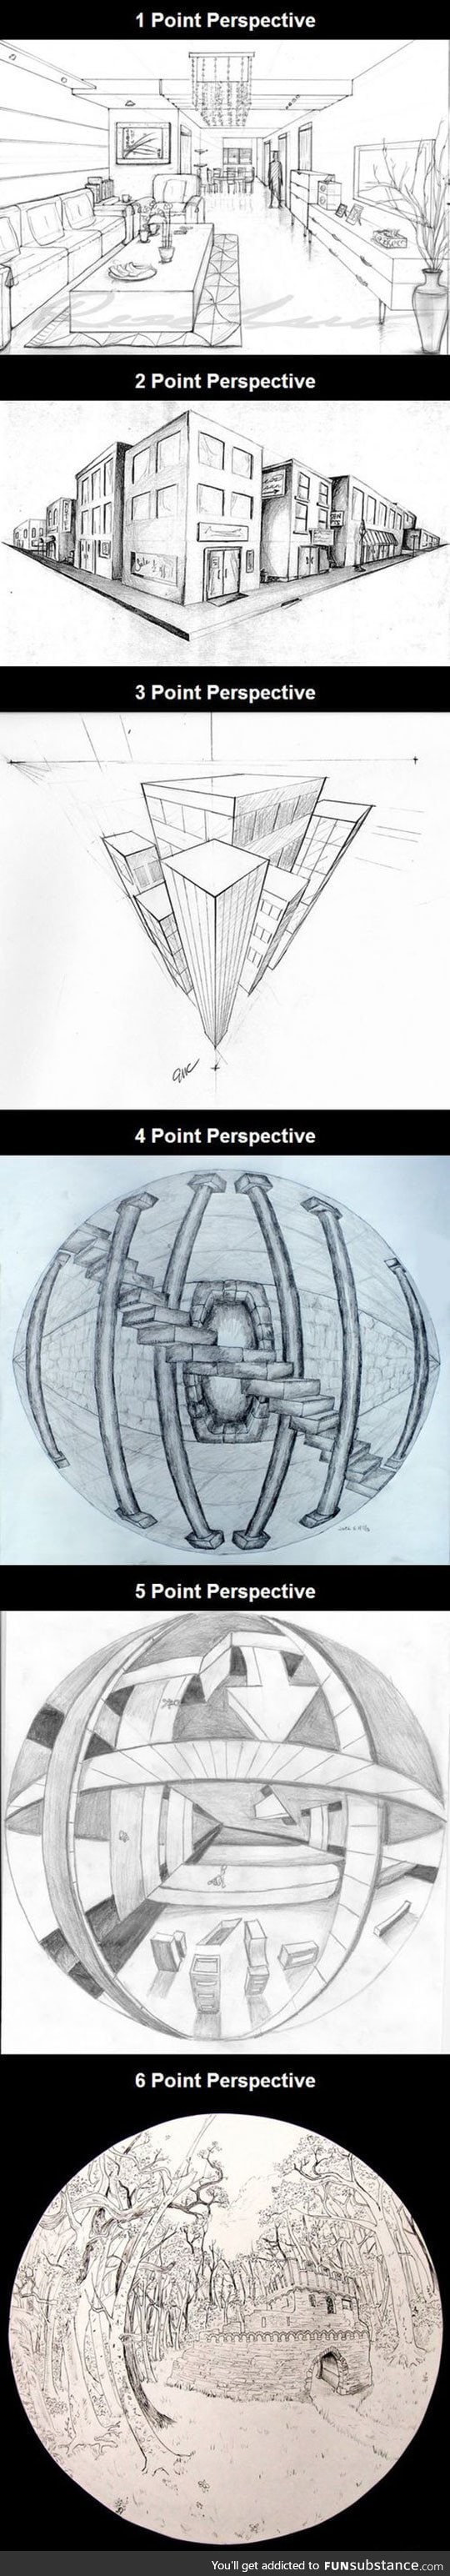 Drawings showing perspective points